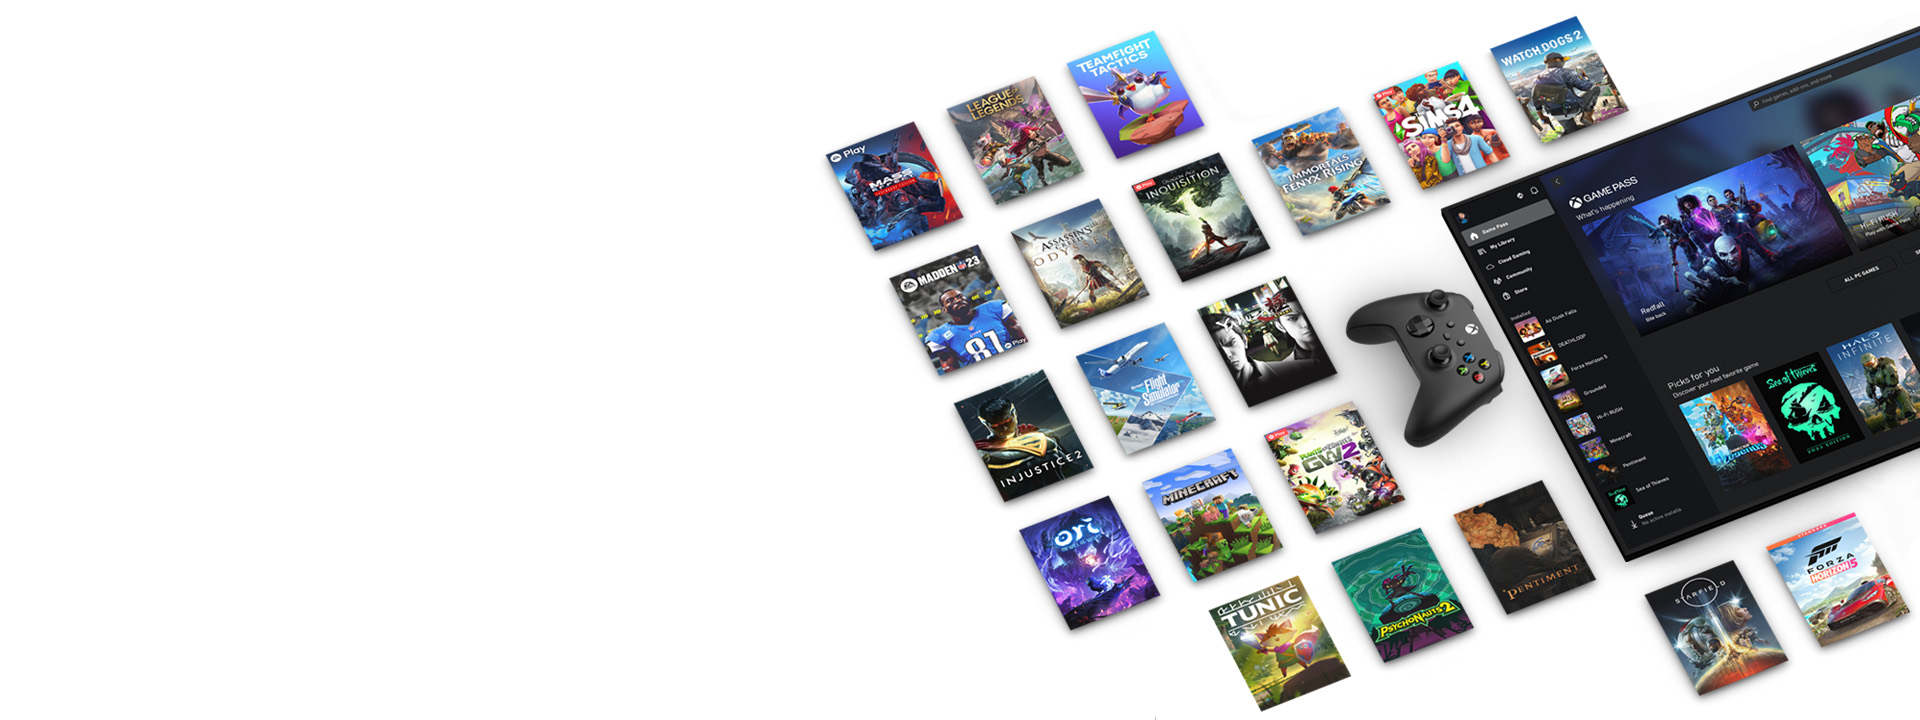 Isometric of Xbox Game Pass games, TV screen, Xbox Series S, Xbox wireless controller, tablet, and mobile phone